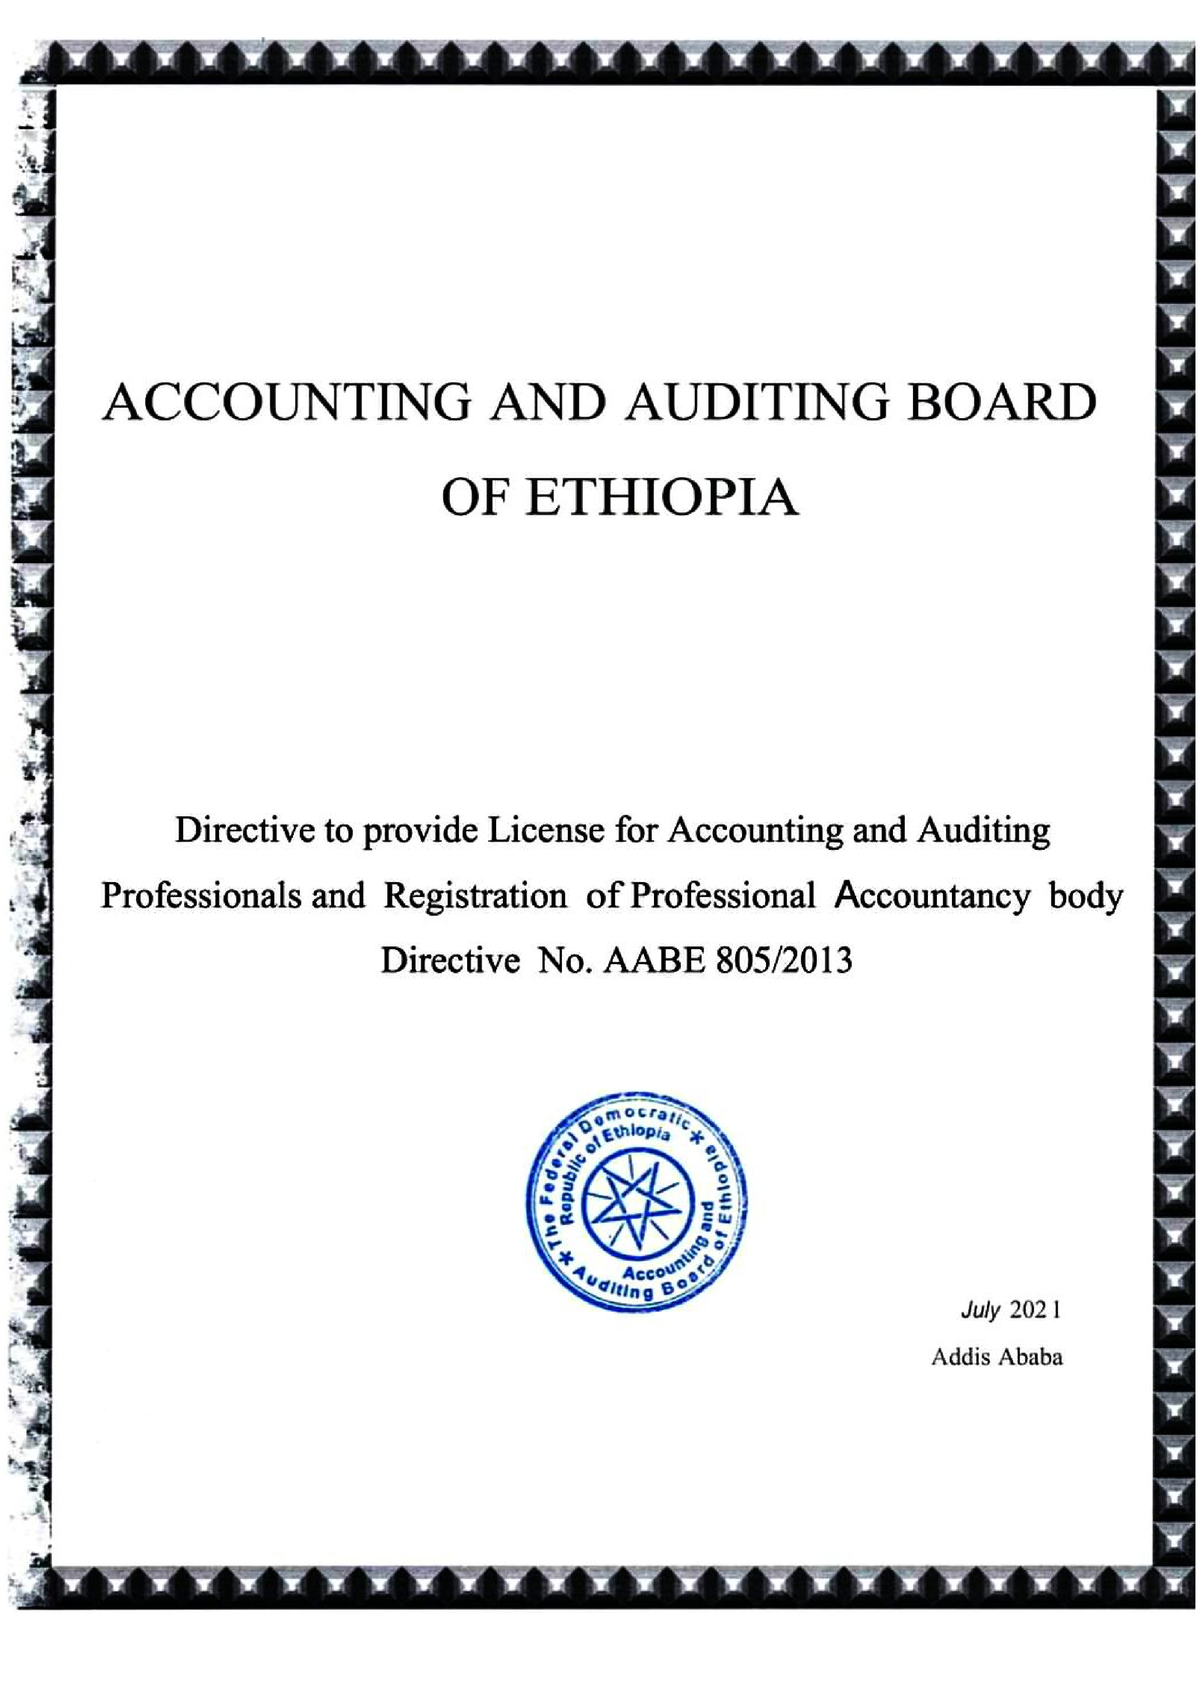 research papers made in ethiopia on accounting